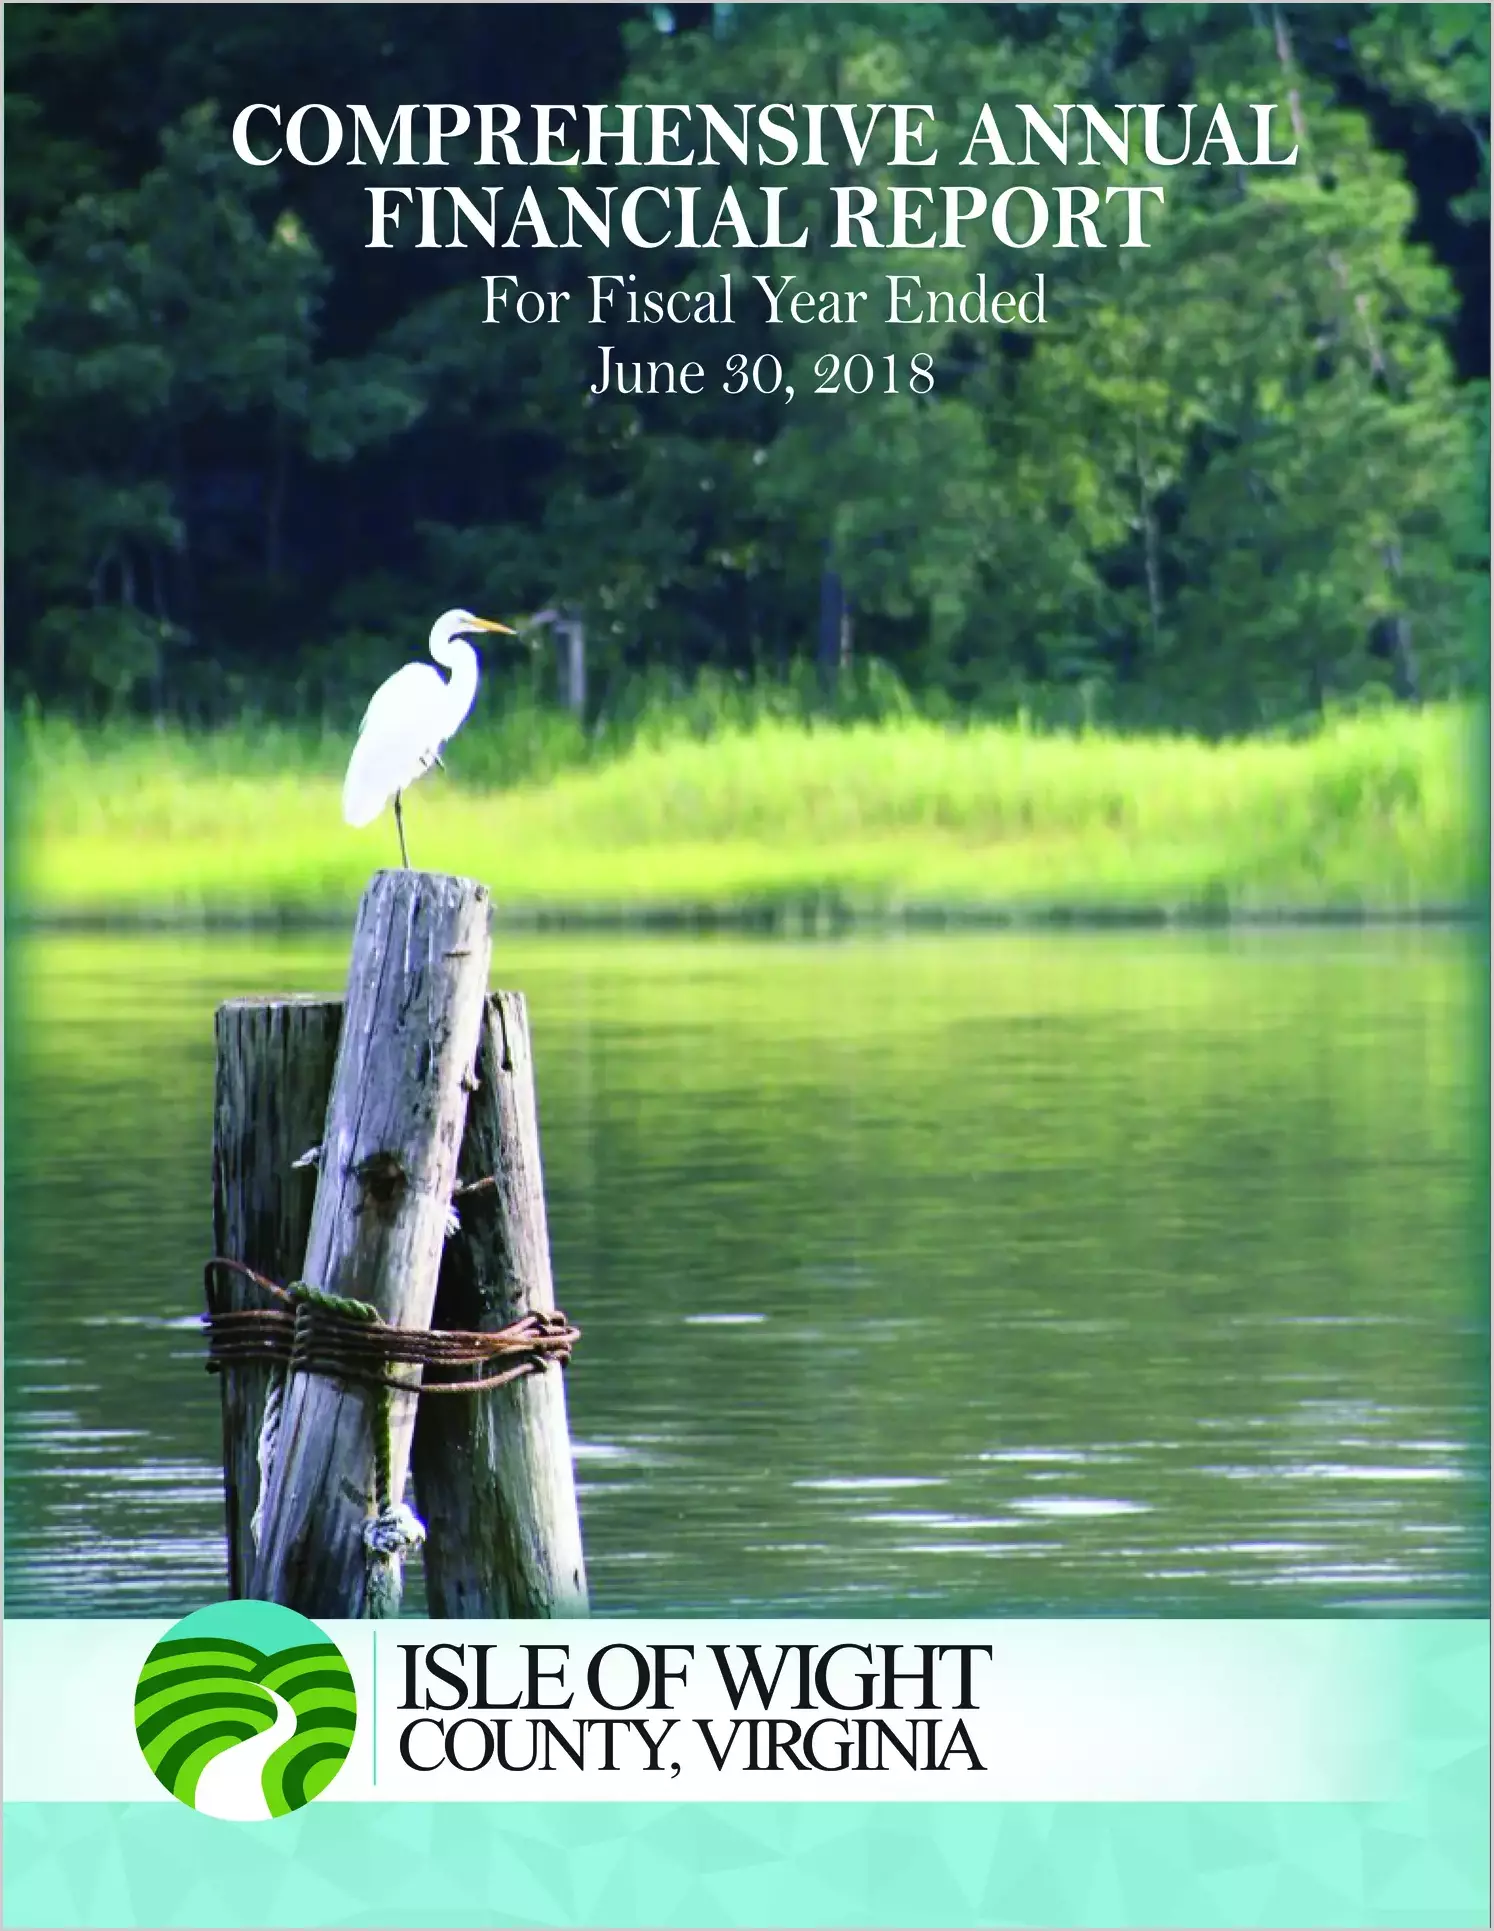 2018 Annual Financial Report for County of Isle of Wight